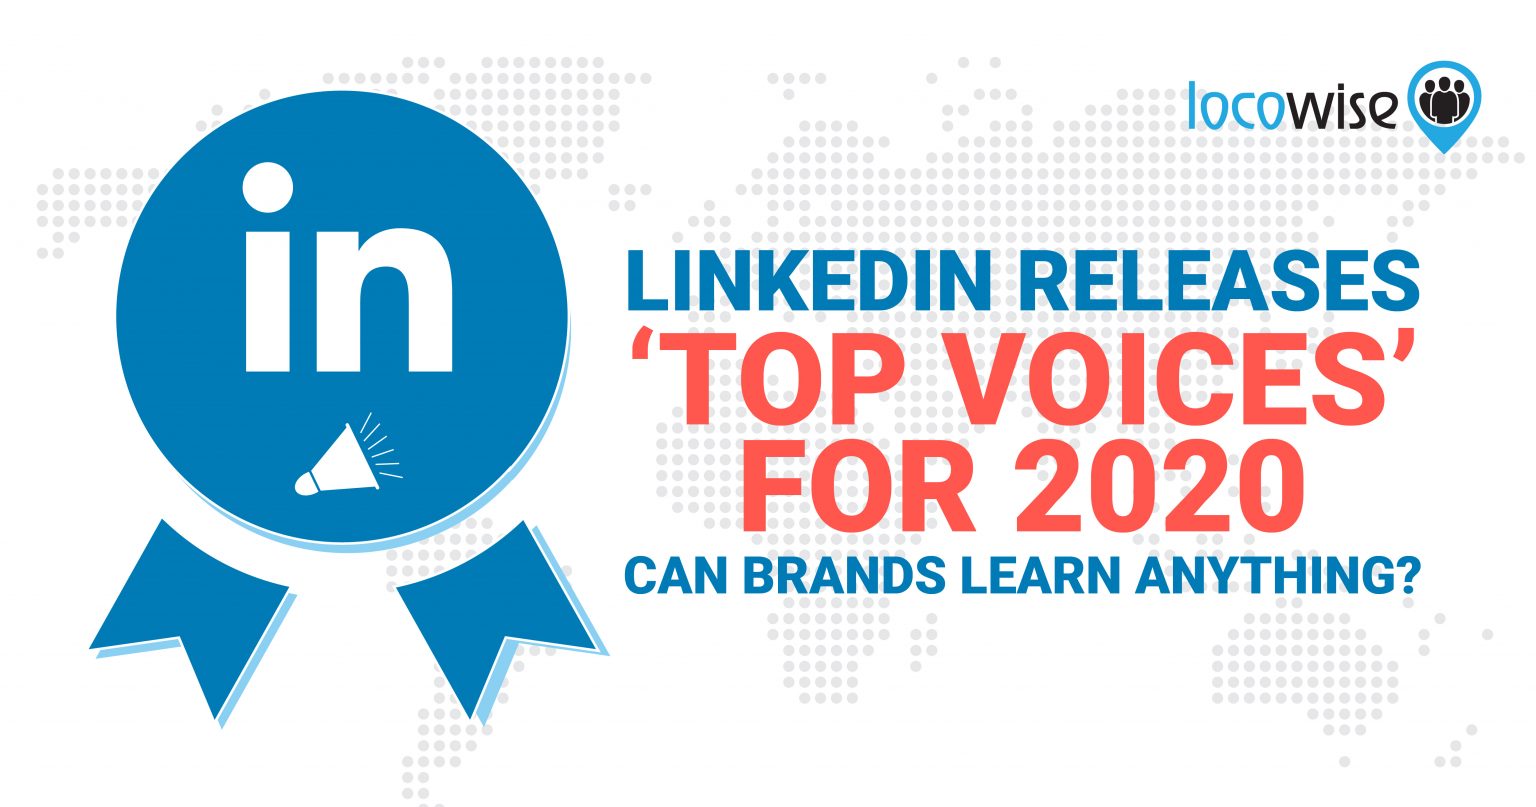 LinkedIn releases ‘Top Voices’ for 2020. Can brands learn anything